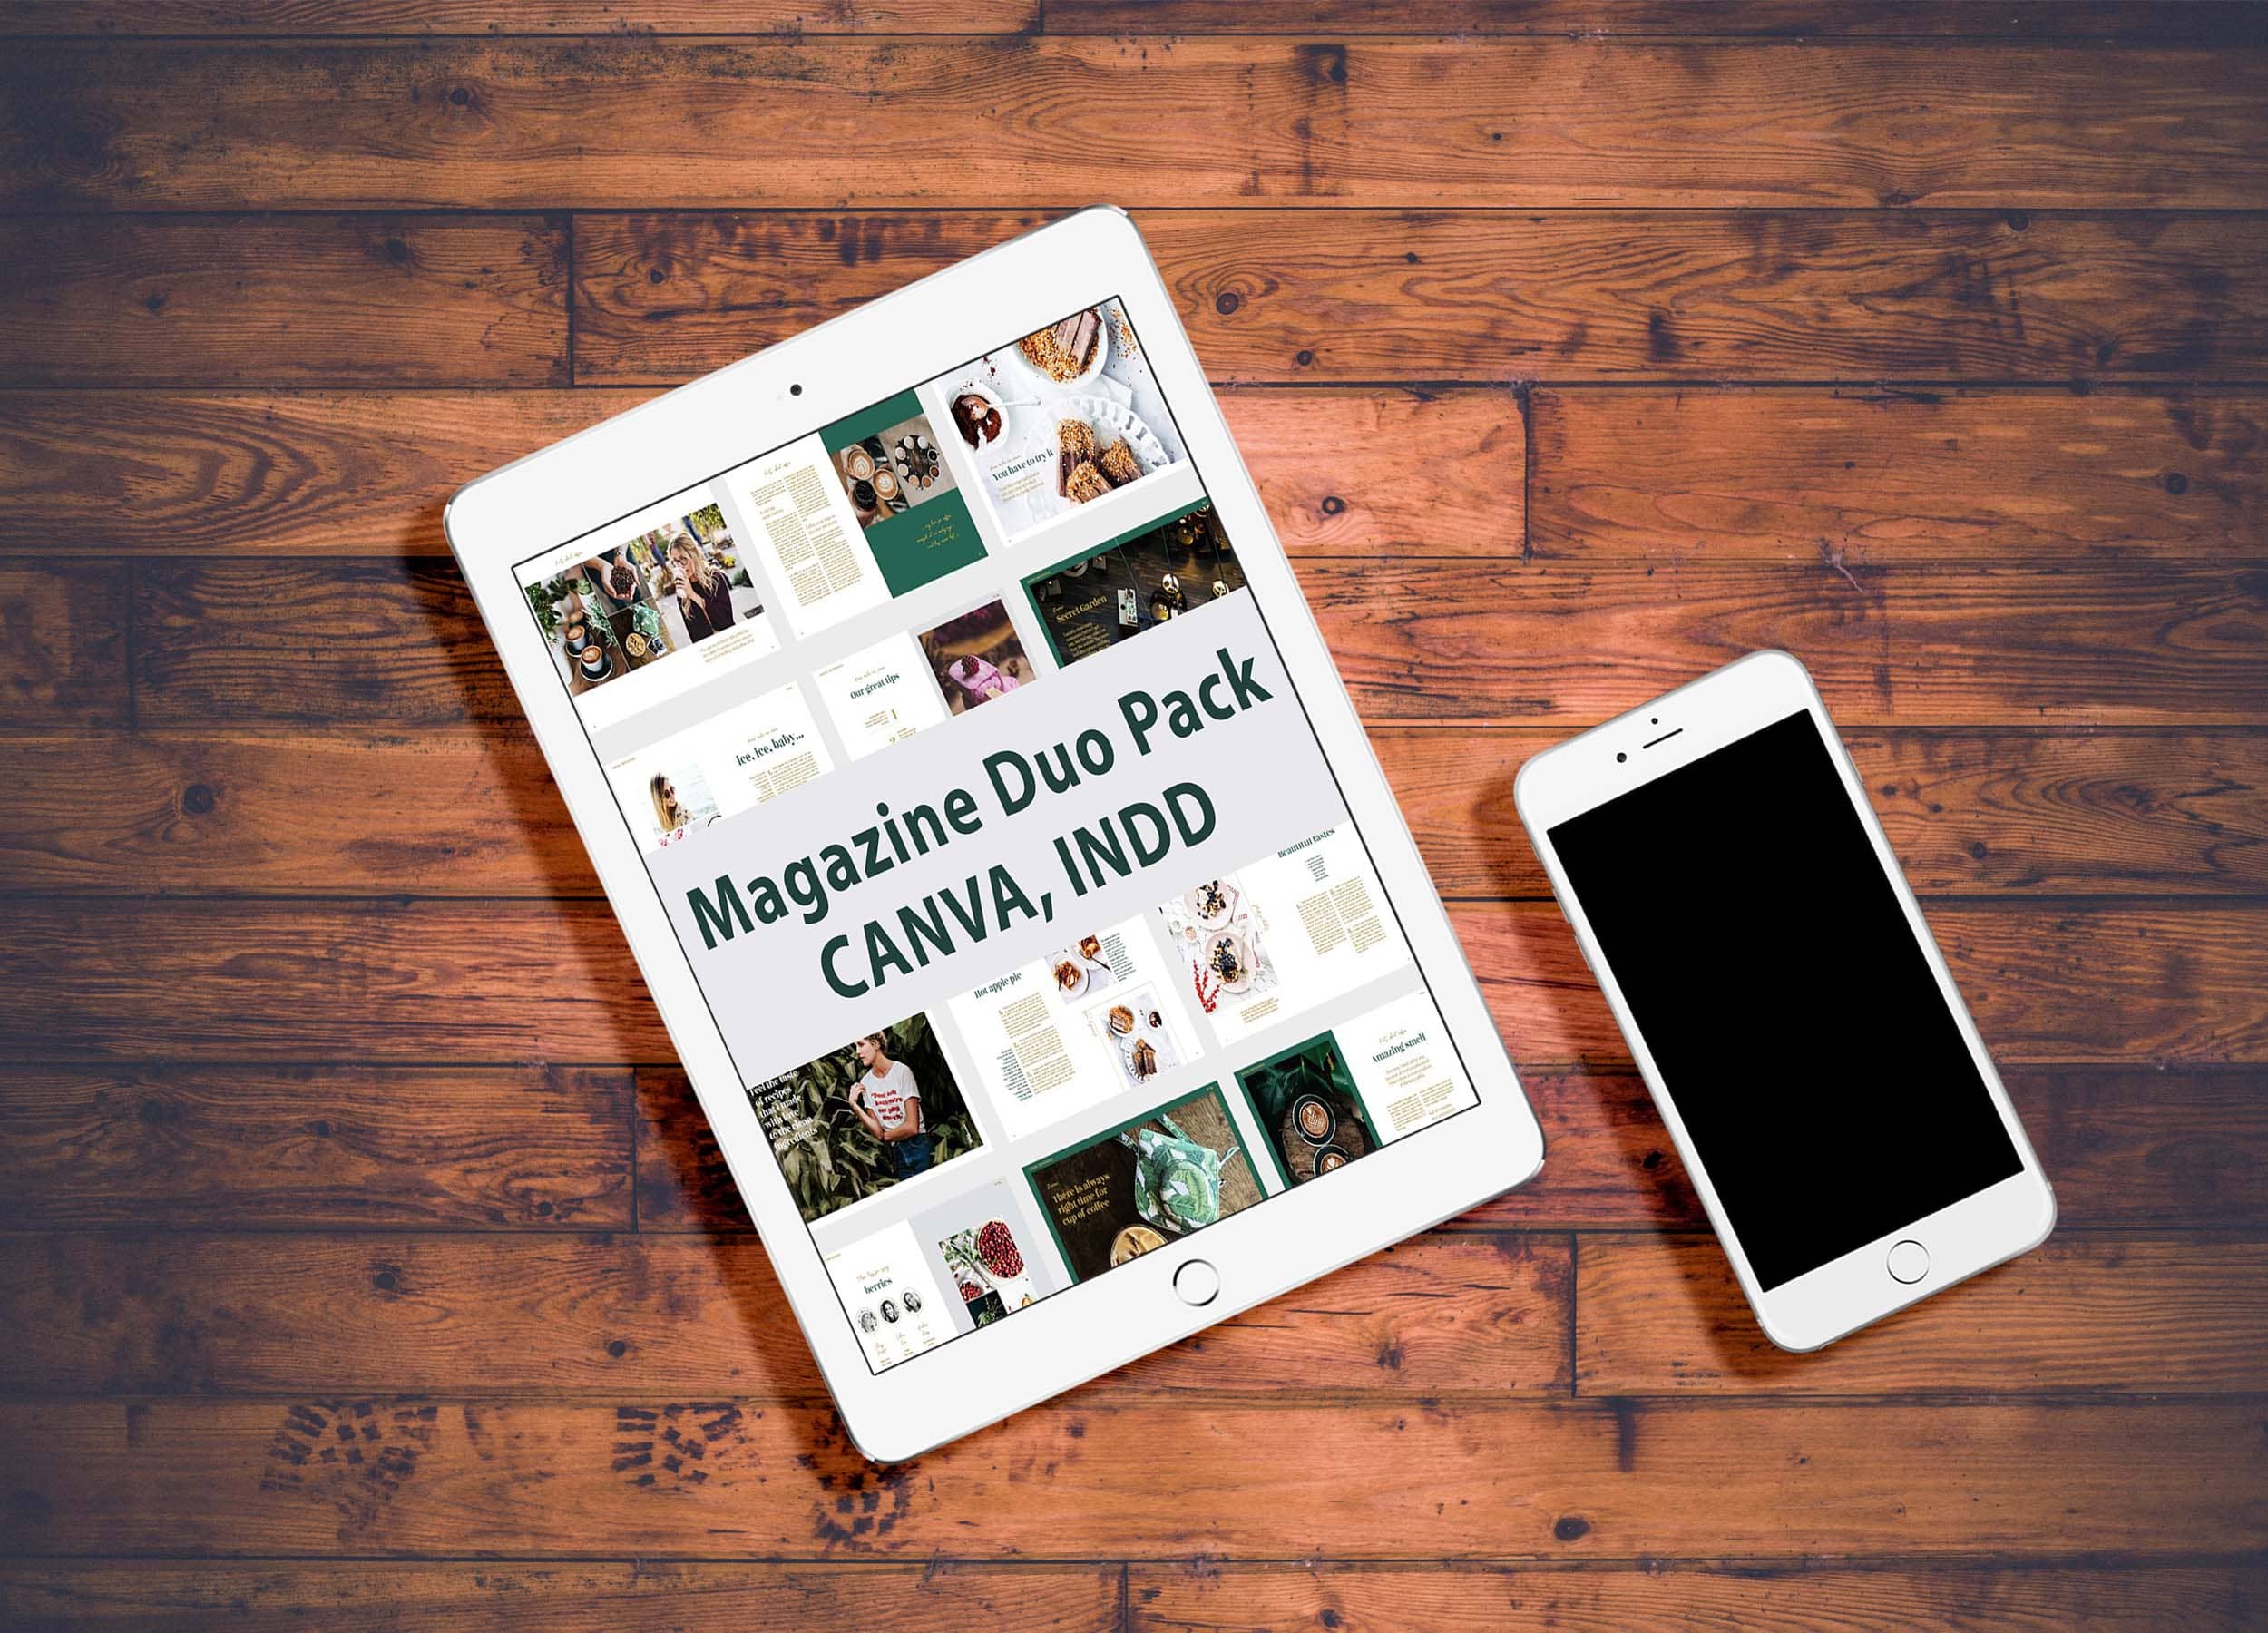 magazine duo pack canva indd tablet mockup.